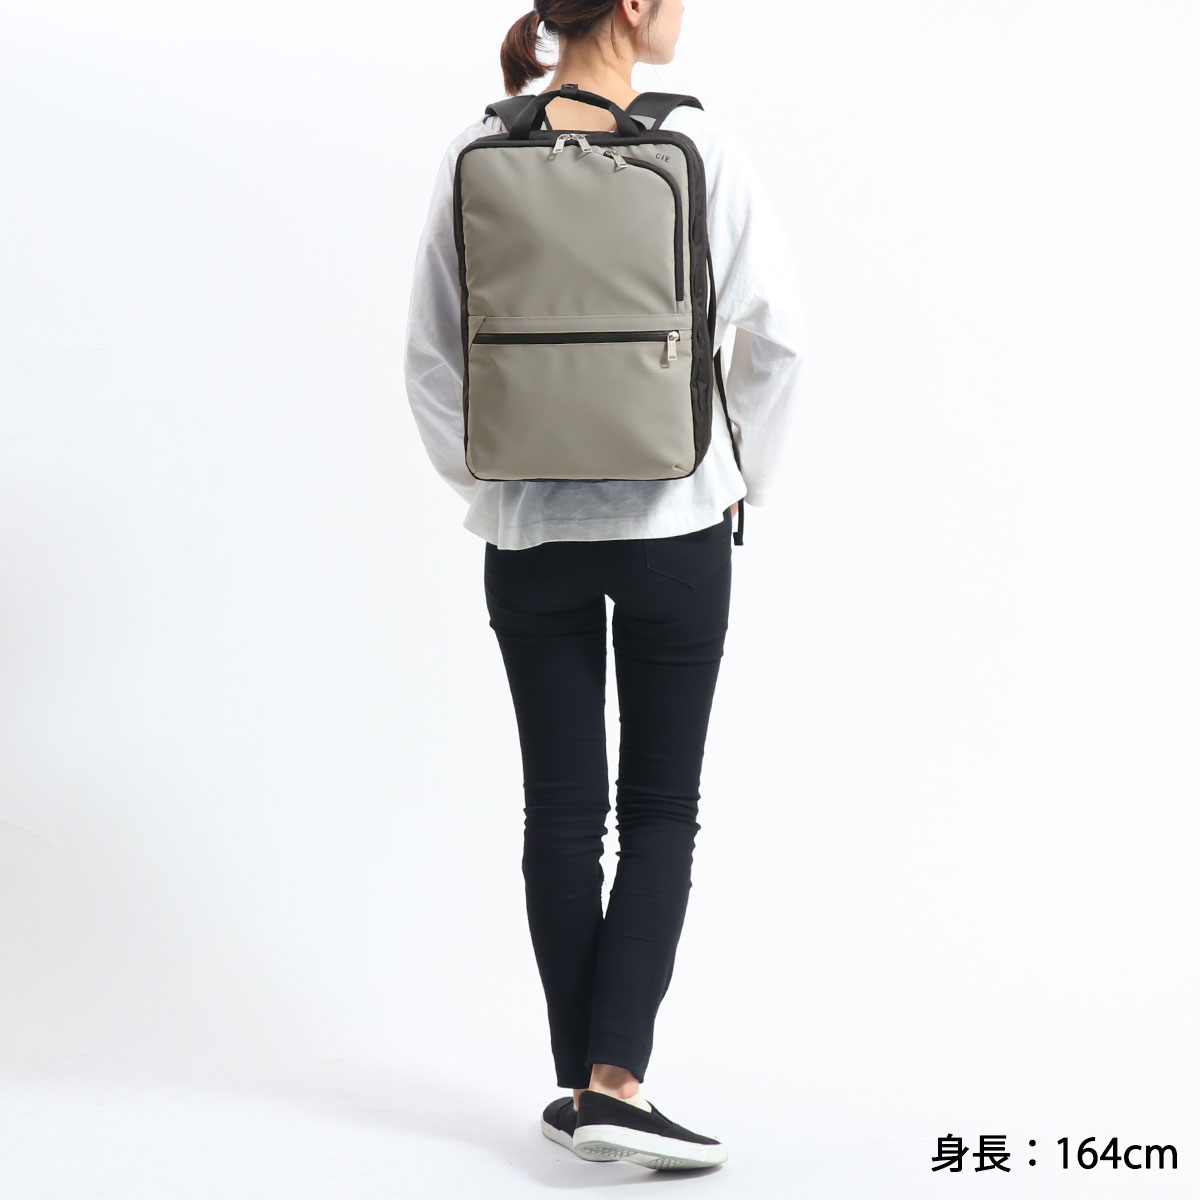 CIE 最大27%☆9/23限定 CIE リュック シー VARIOUS 2WAYBACKPACK S リュックサック 通学 防水 小さめ メンズ  レディース 021807 バッグ